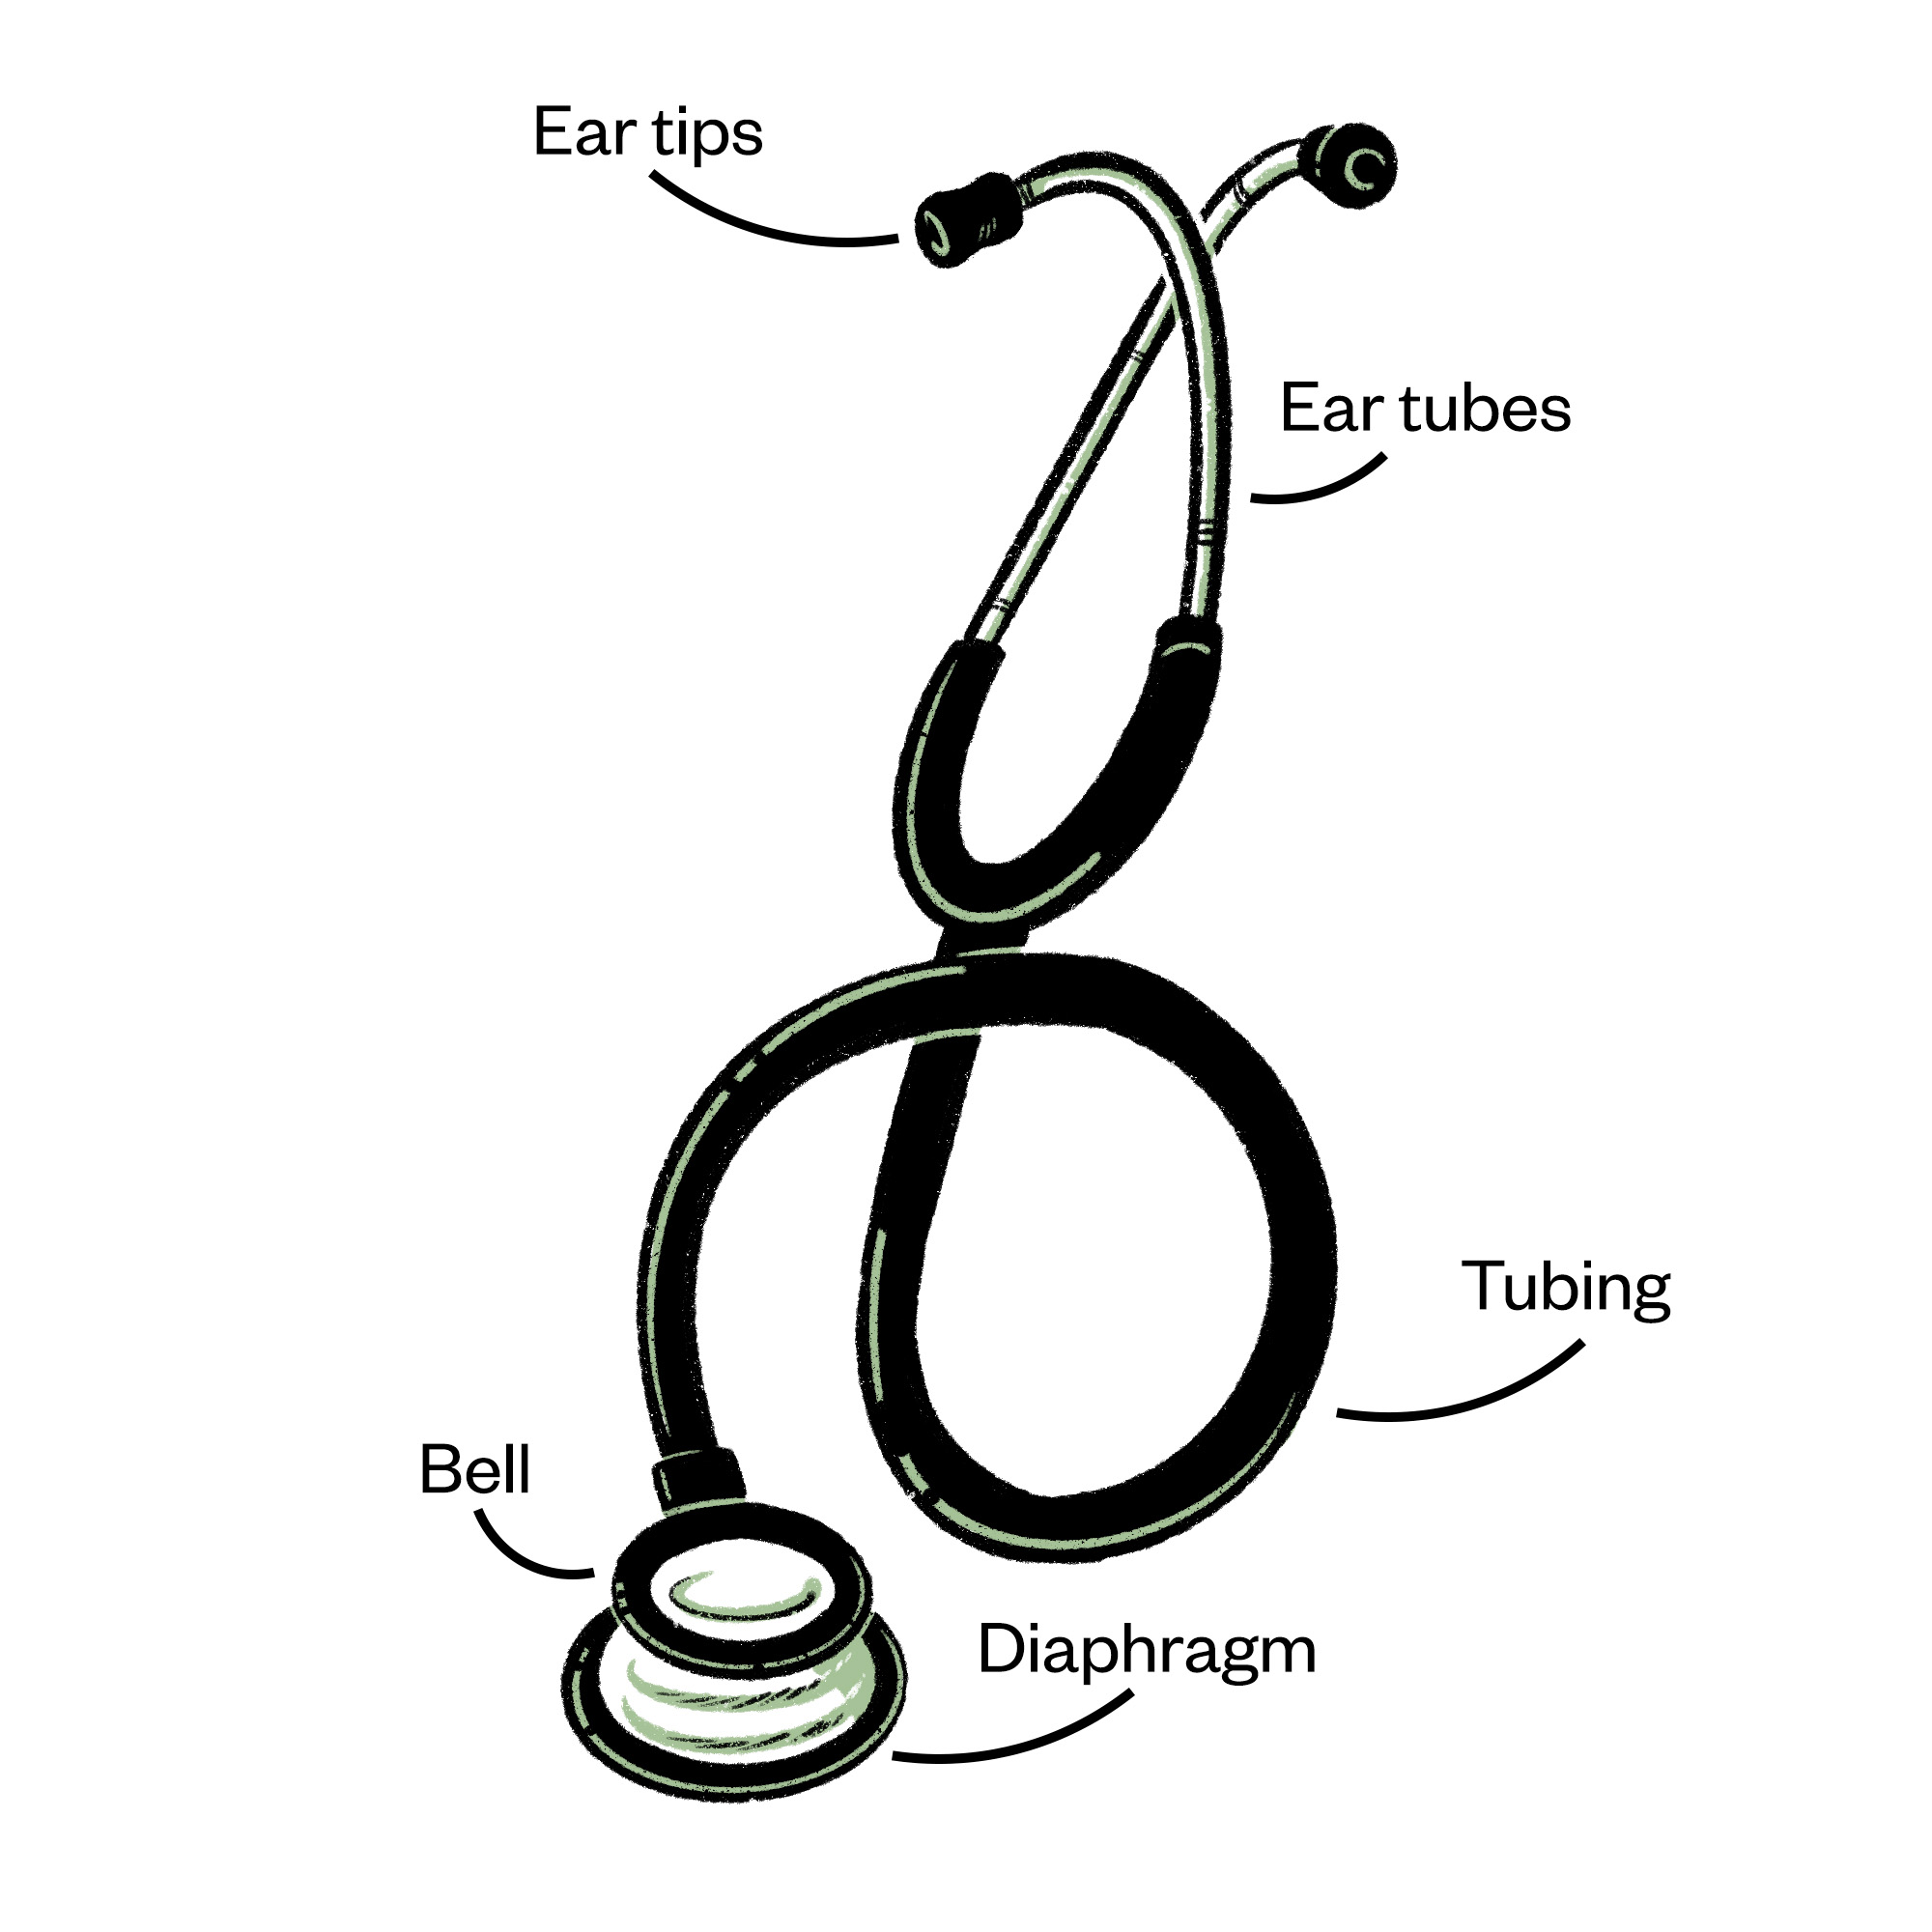 Illustration of a stethoscope showing the different parts (from top to bottom): ear tips, ear tubes, tubing, bell and diaphragm